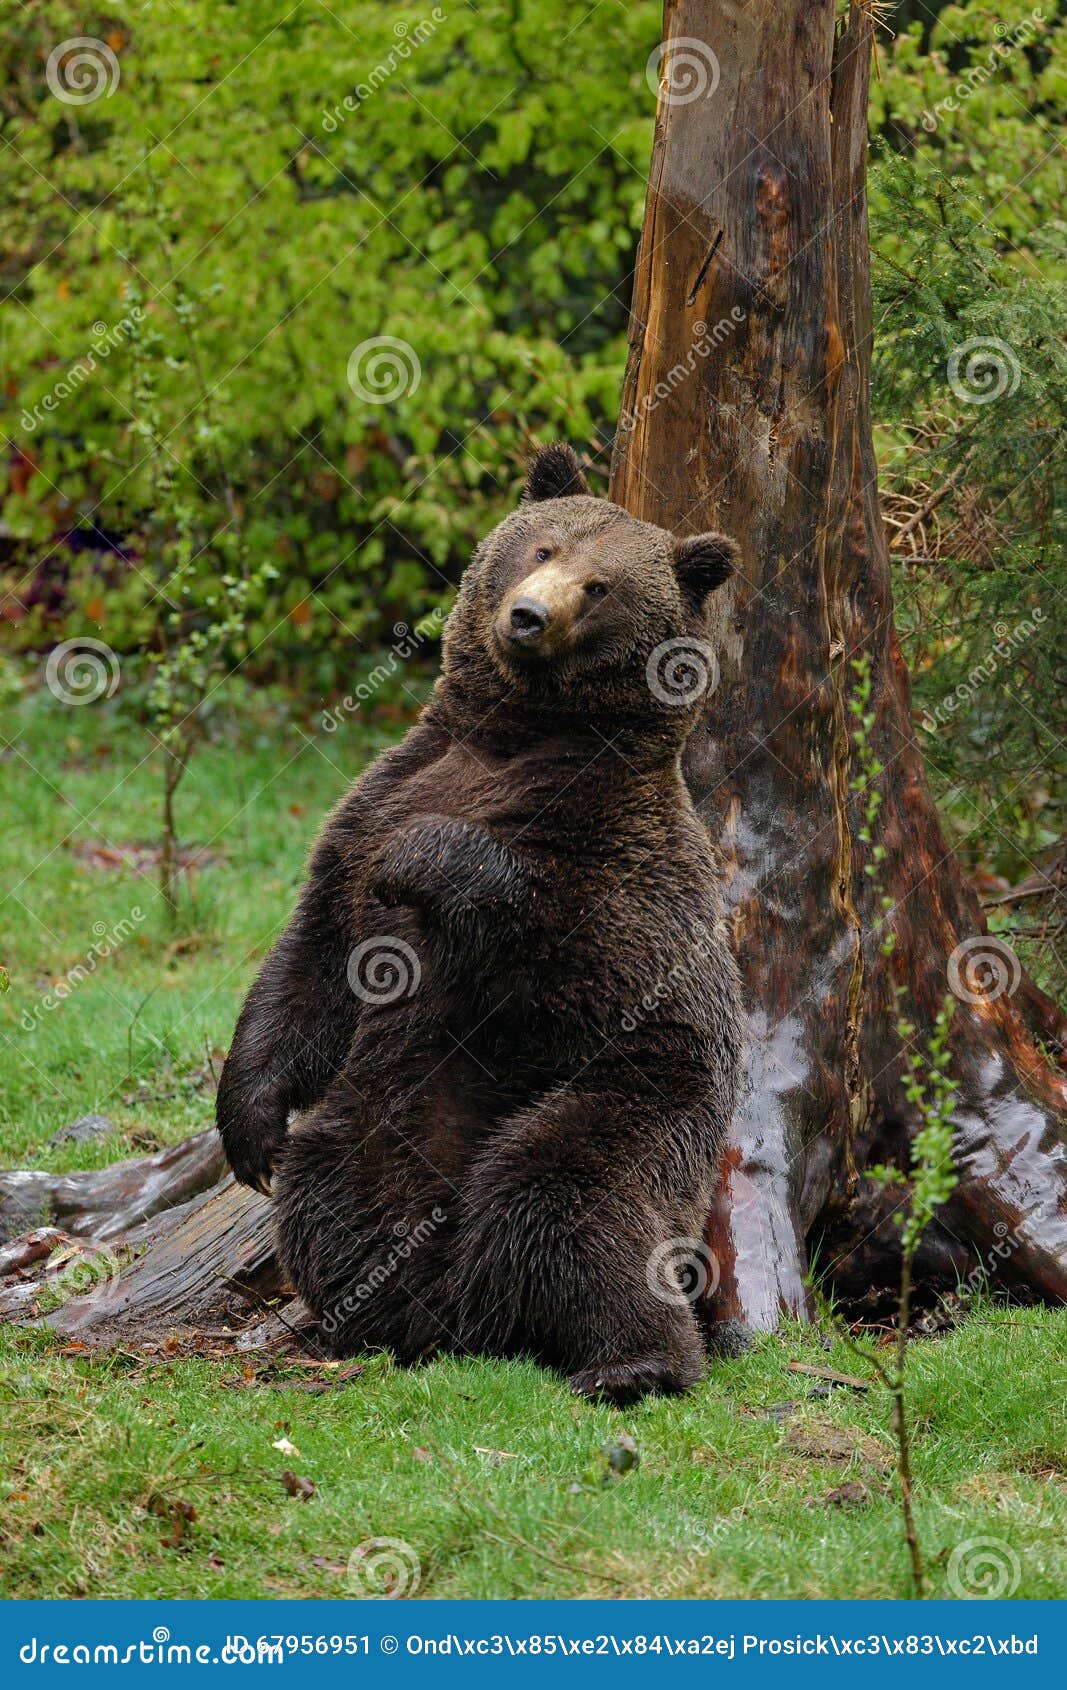 brown bear, ursus arctos, hideen scratch back on the the tree trunk in the forest